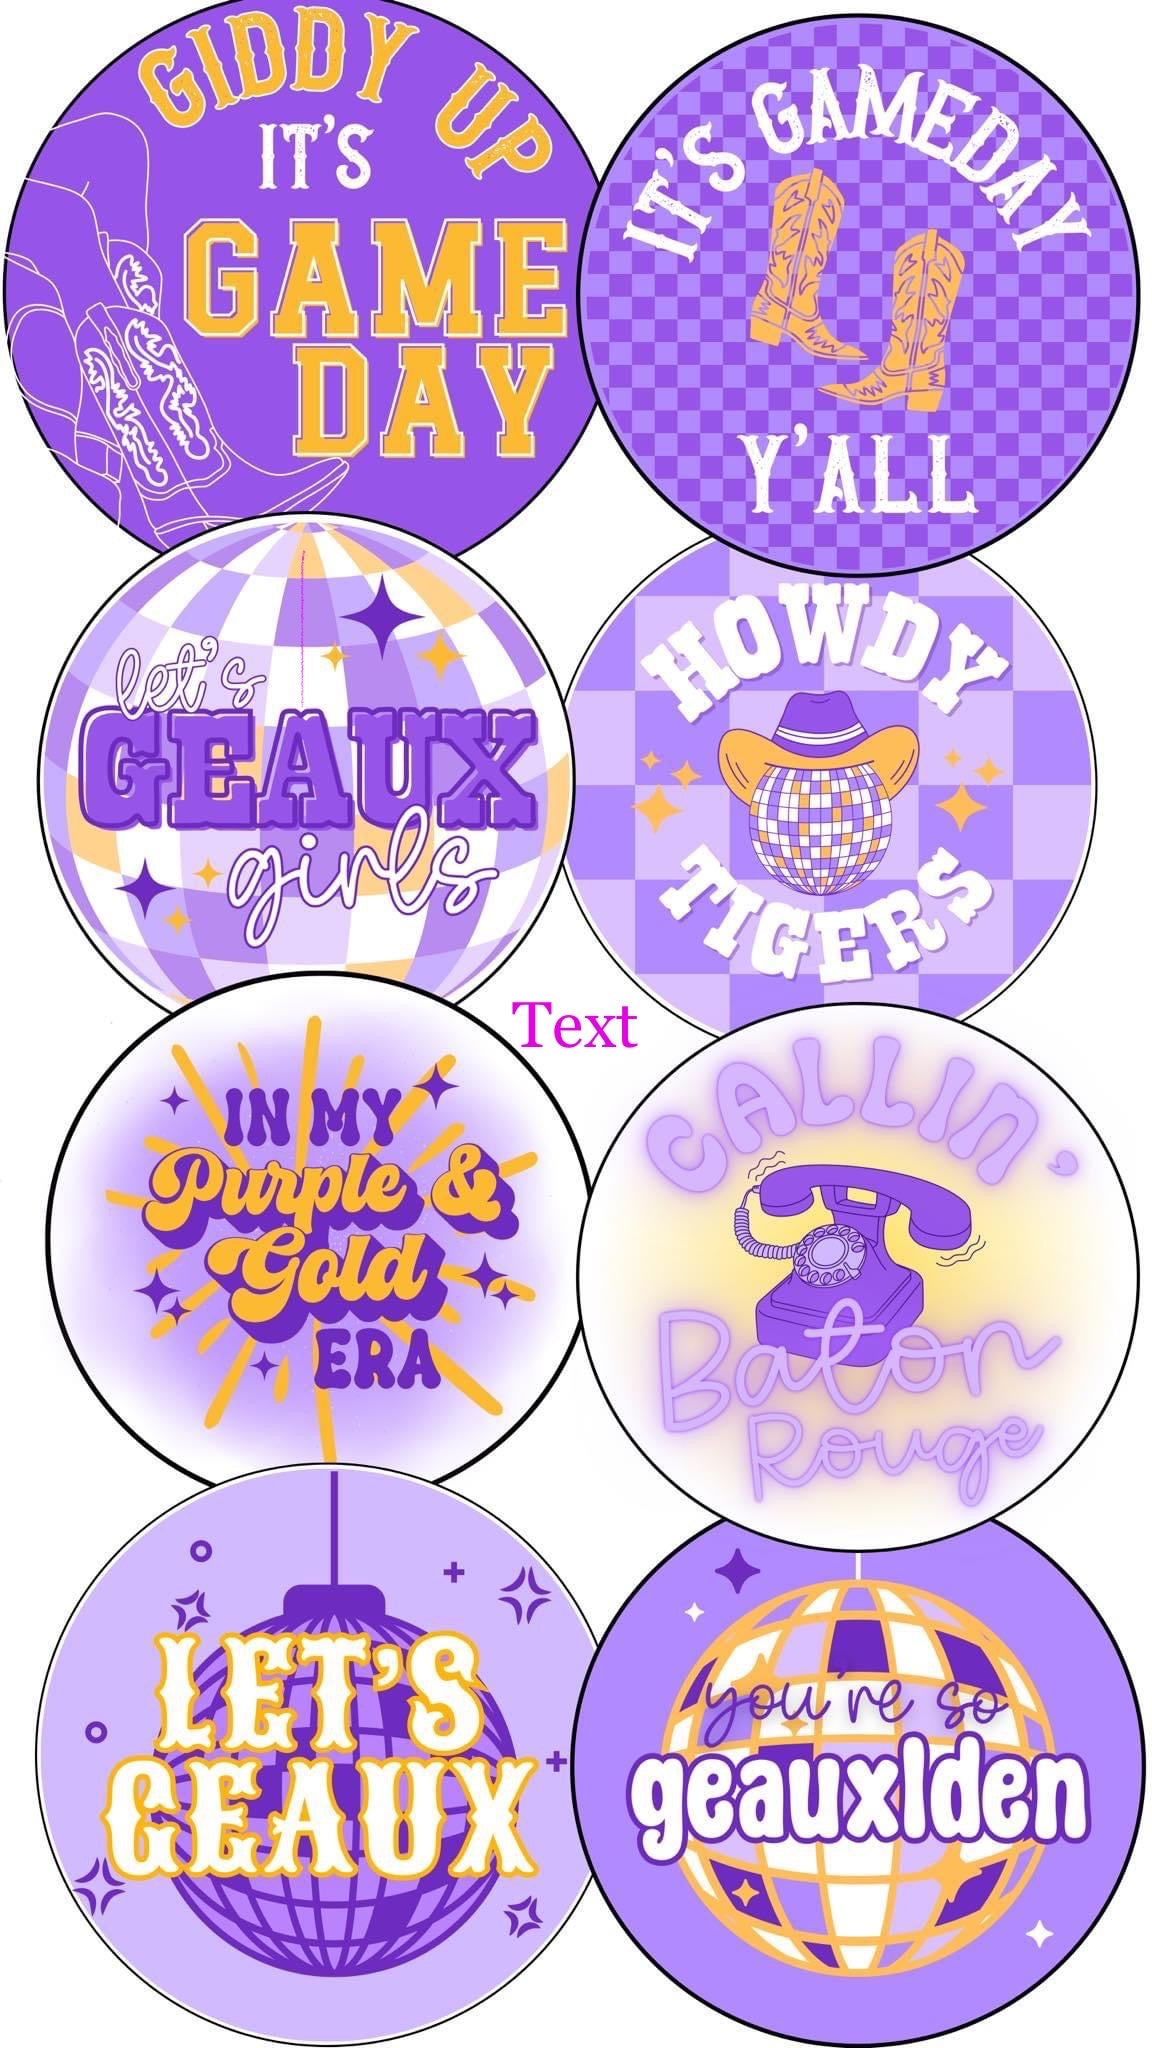 CC Gameday Buttons